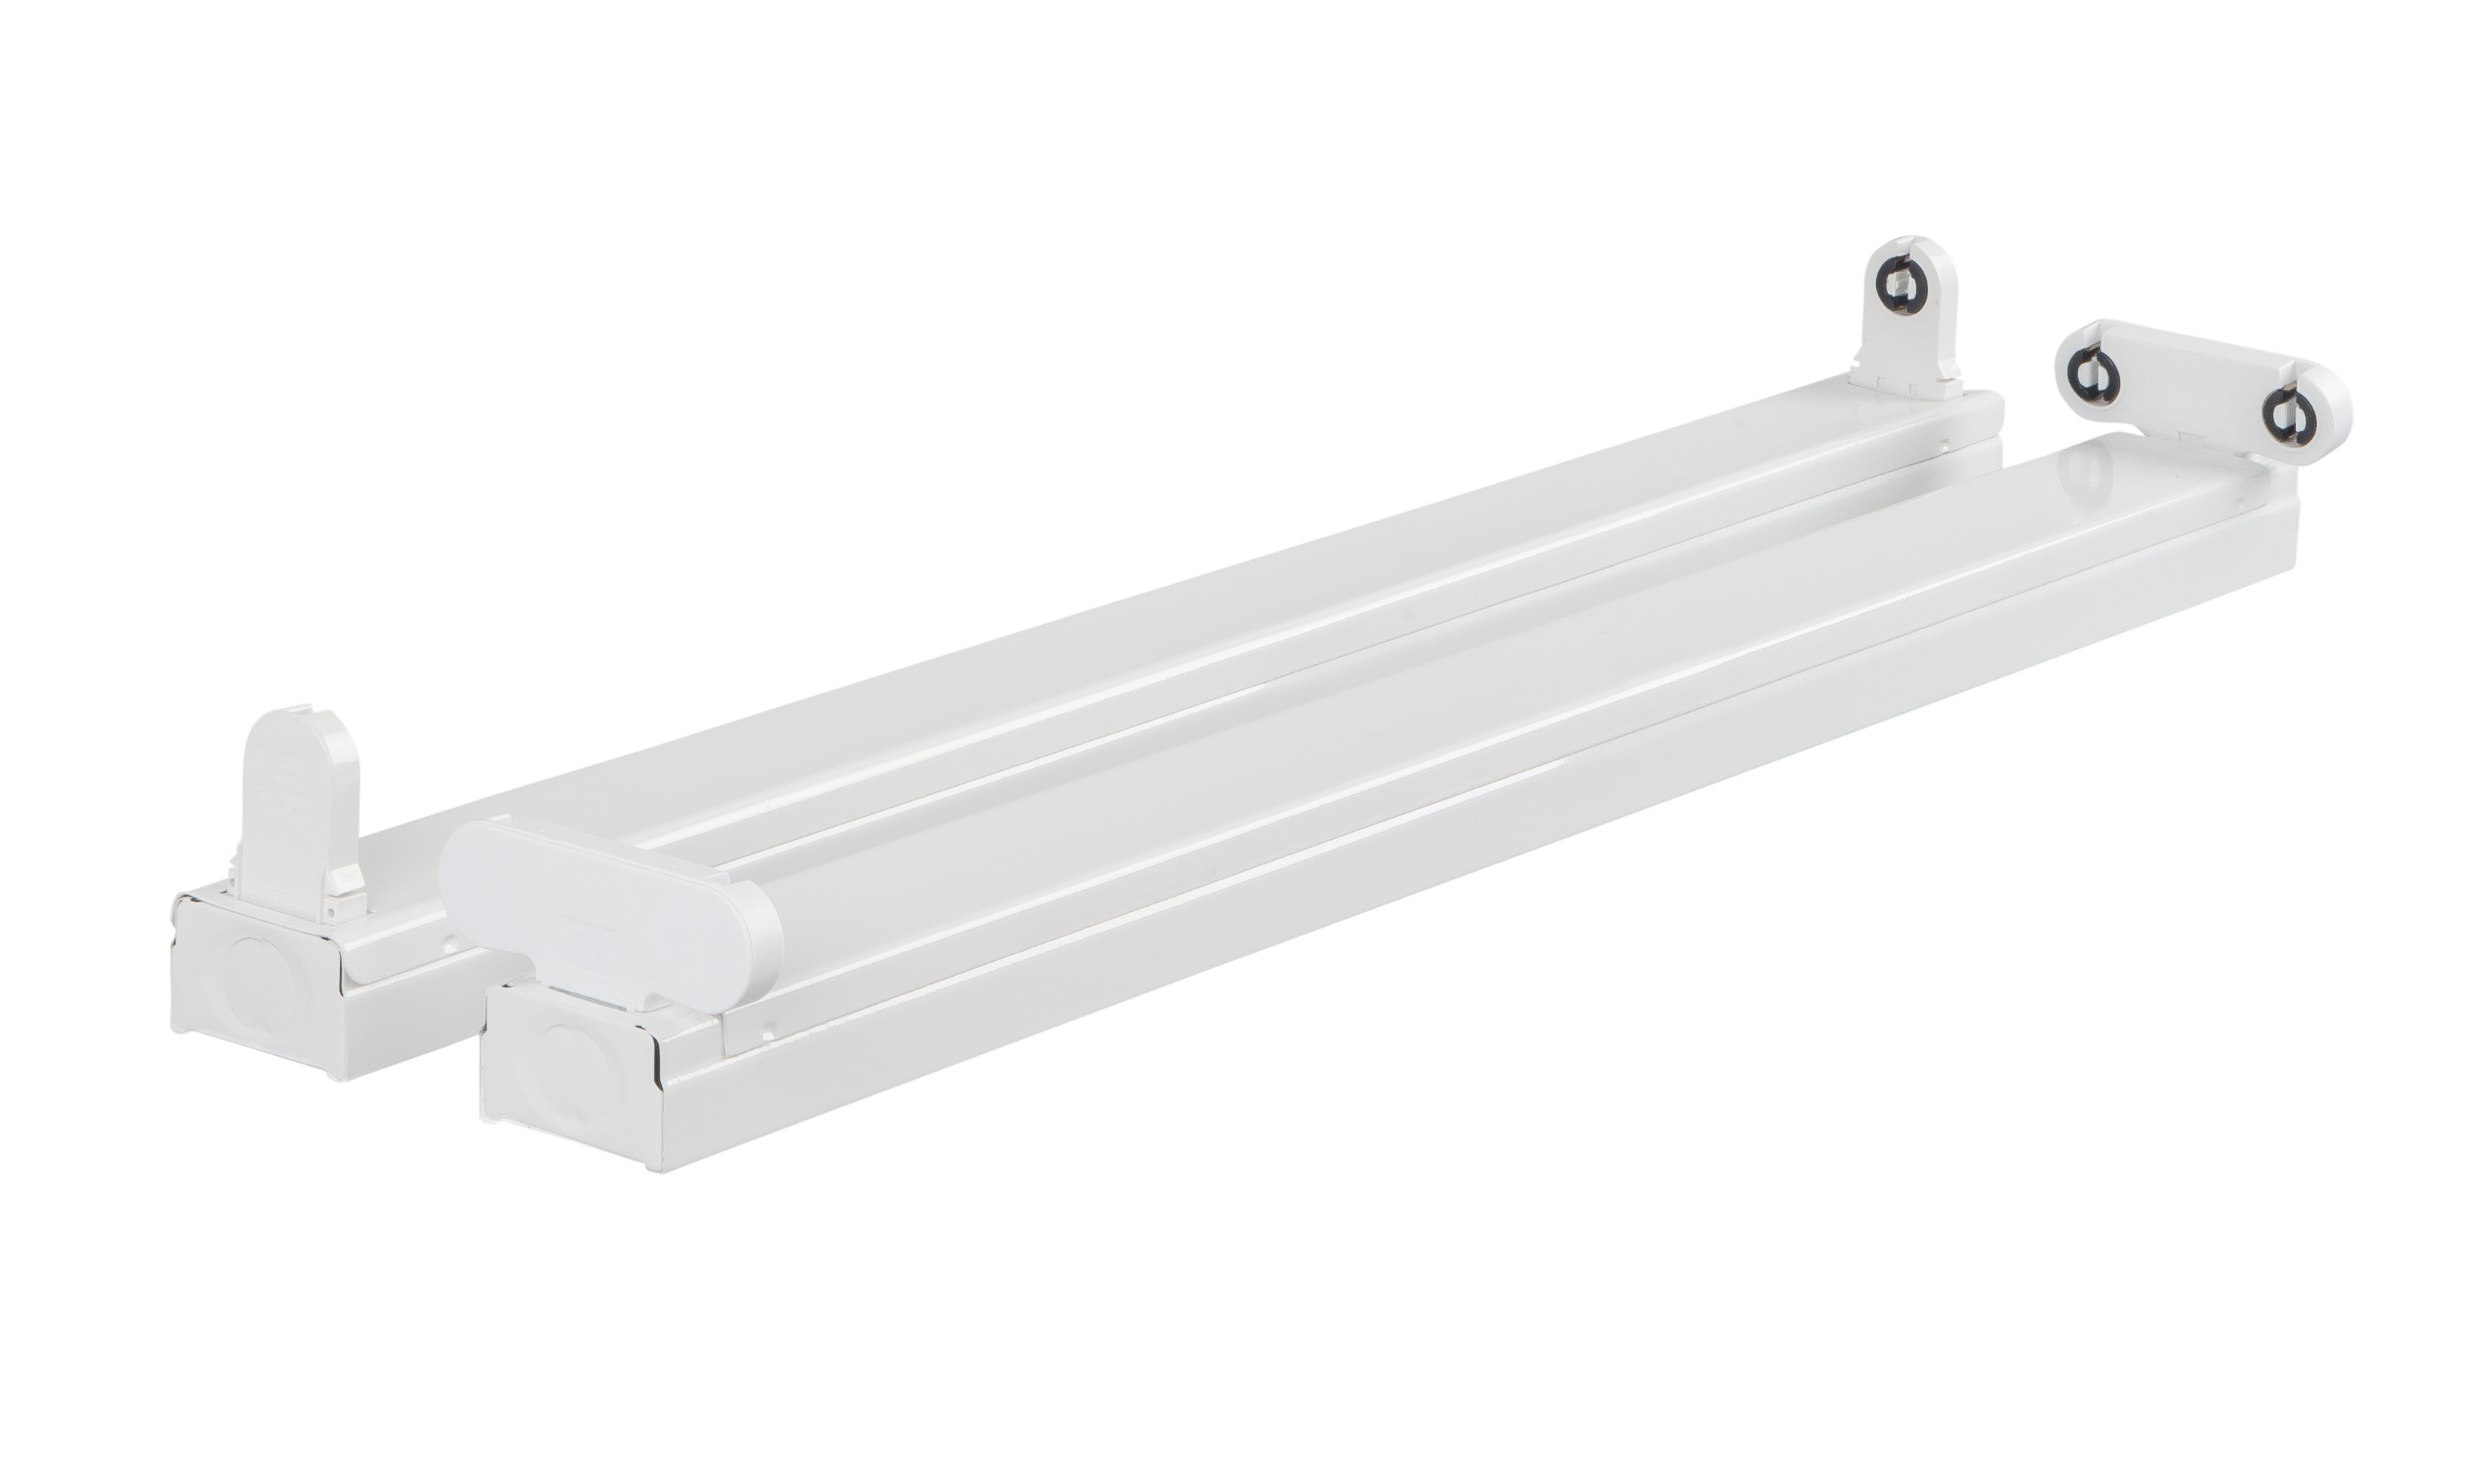 LED Pre-wired Fixture 2FT 4FT 5FT